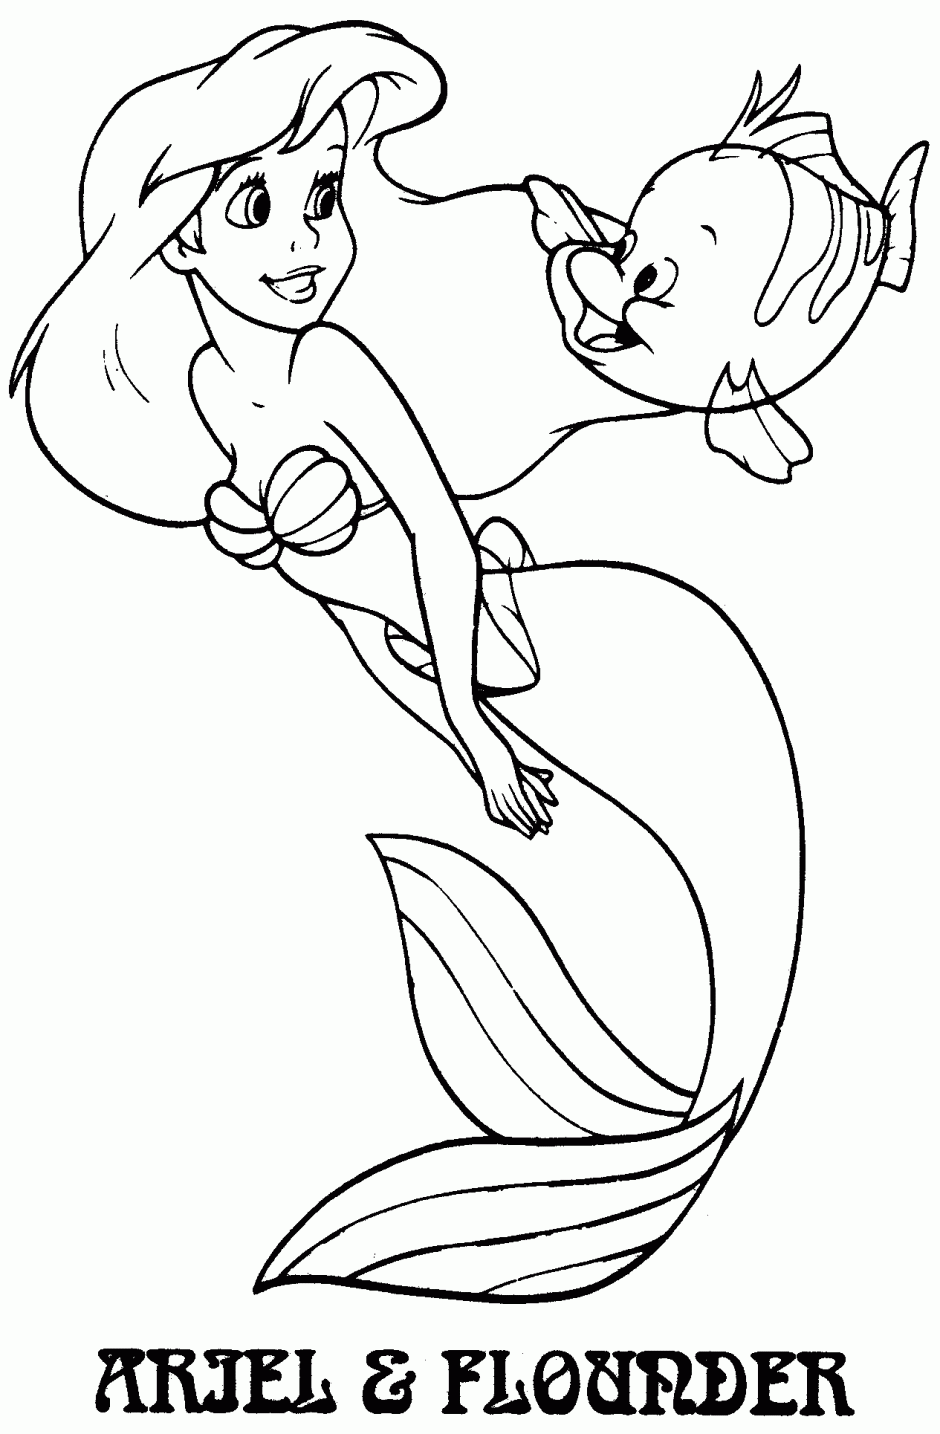 Flourden Princess Mermaid Ariel Coloring Pages for Girls